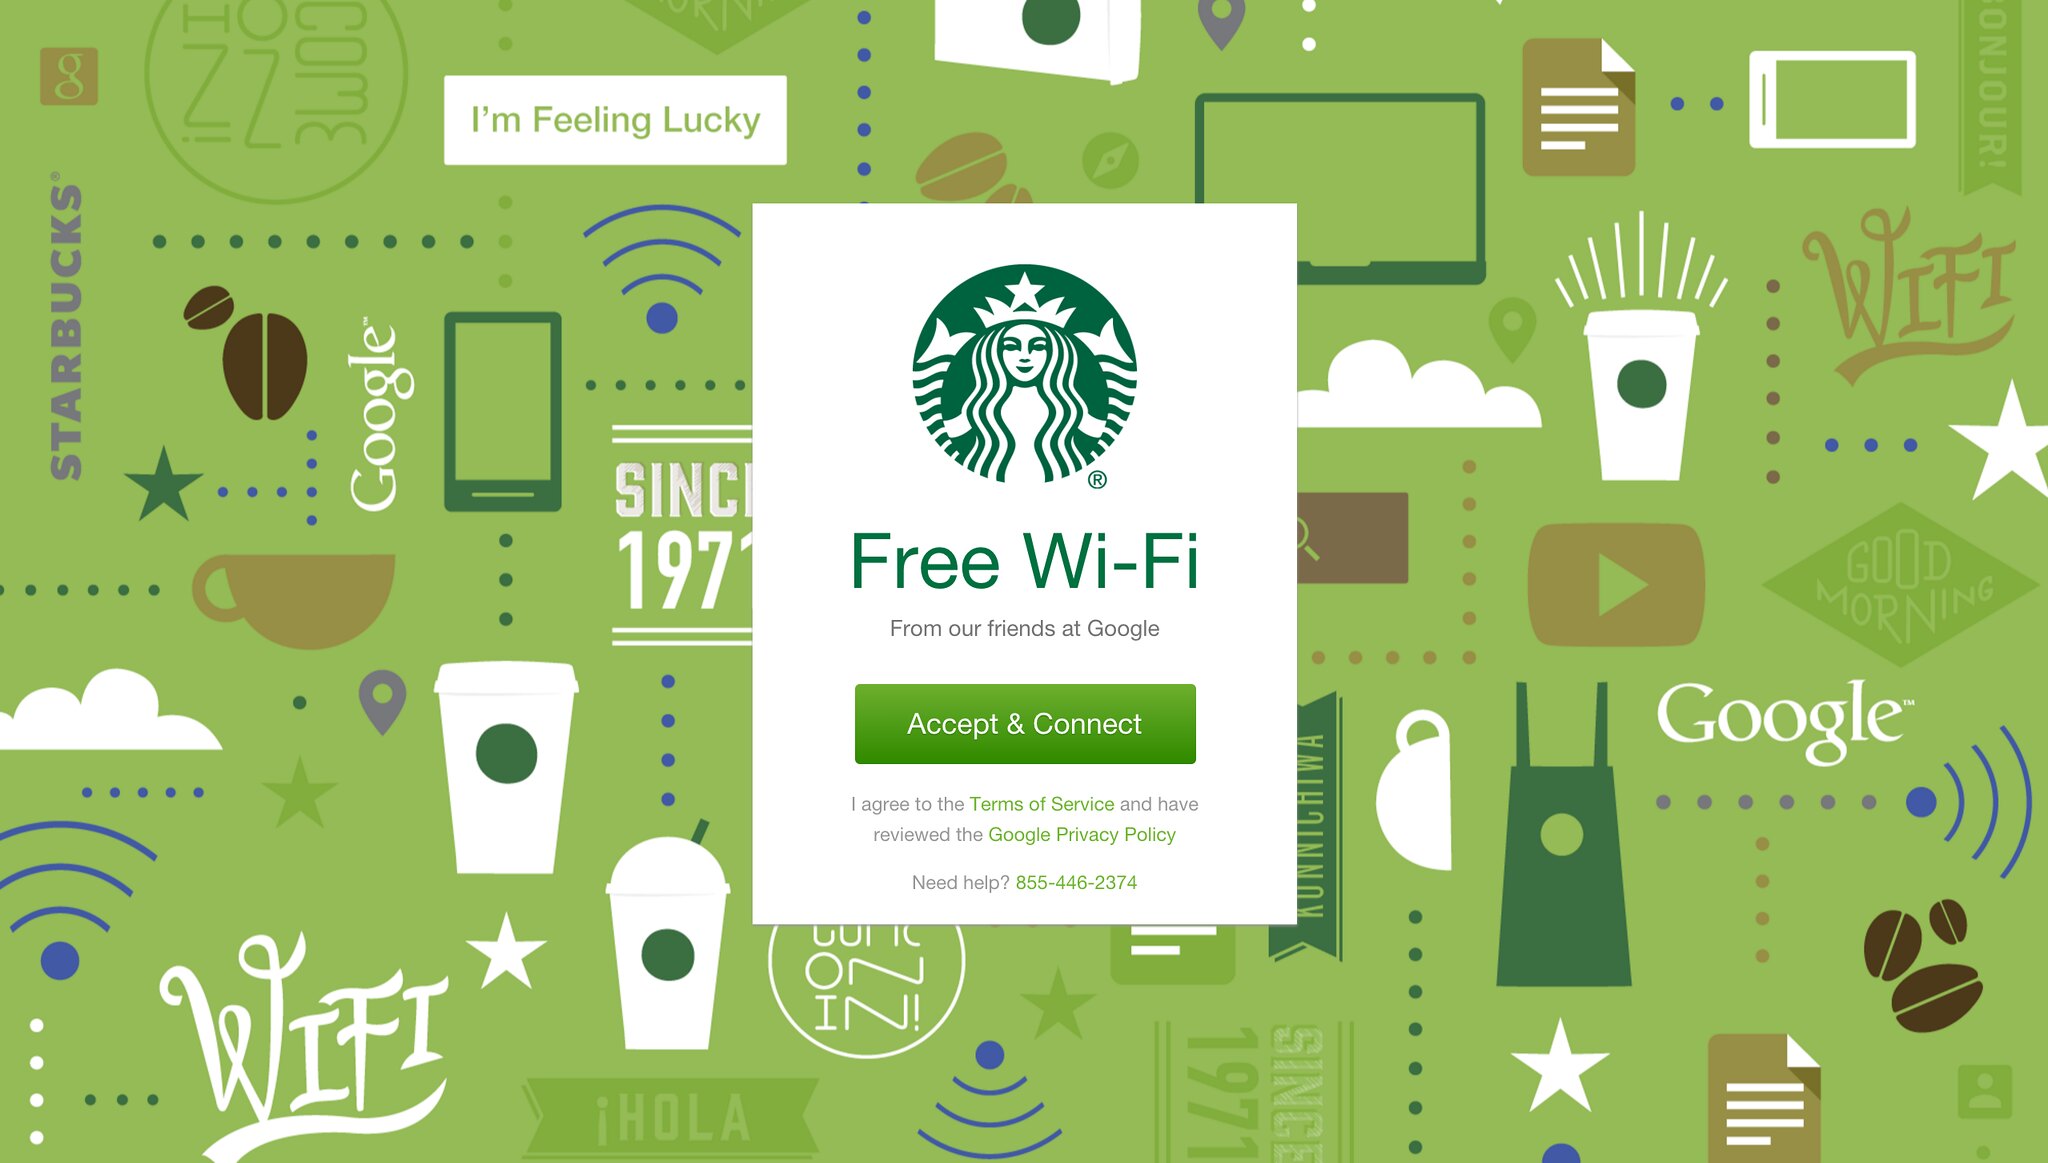 Starbucks Wi-Fi from Google by Chris Messina